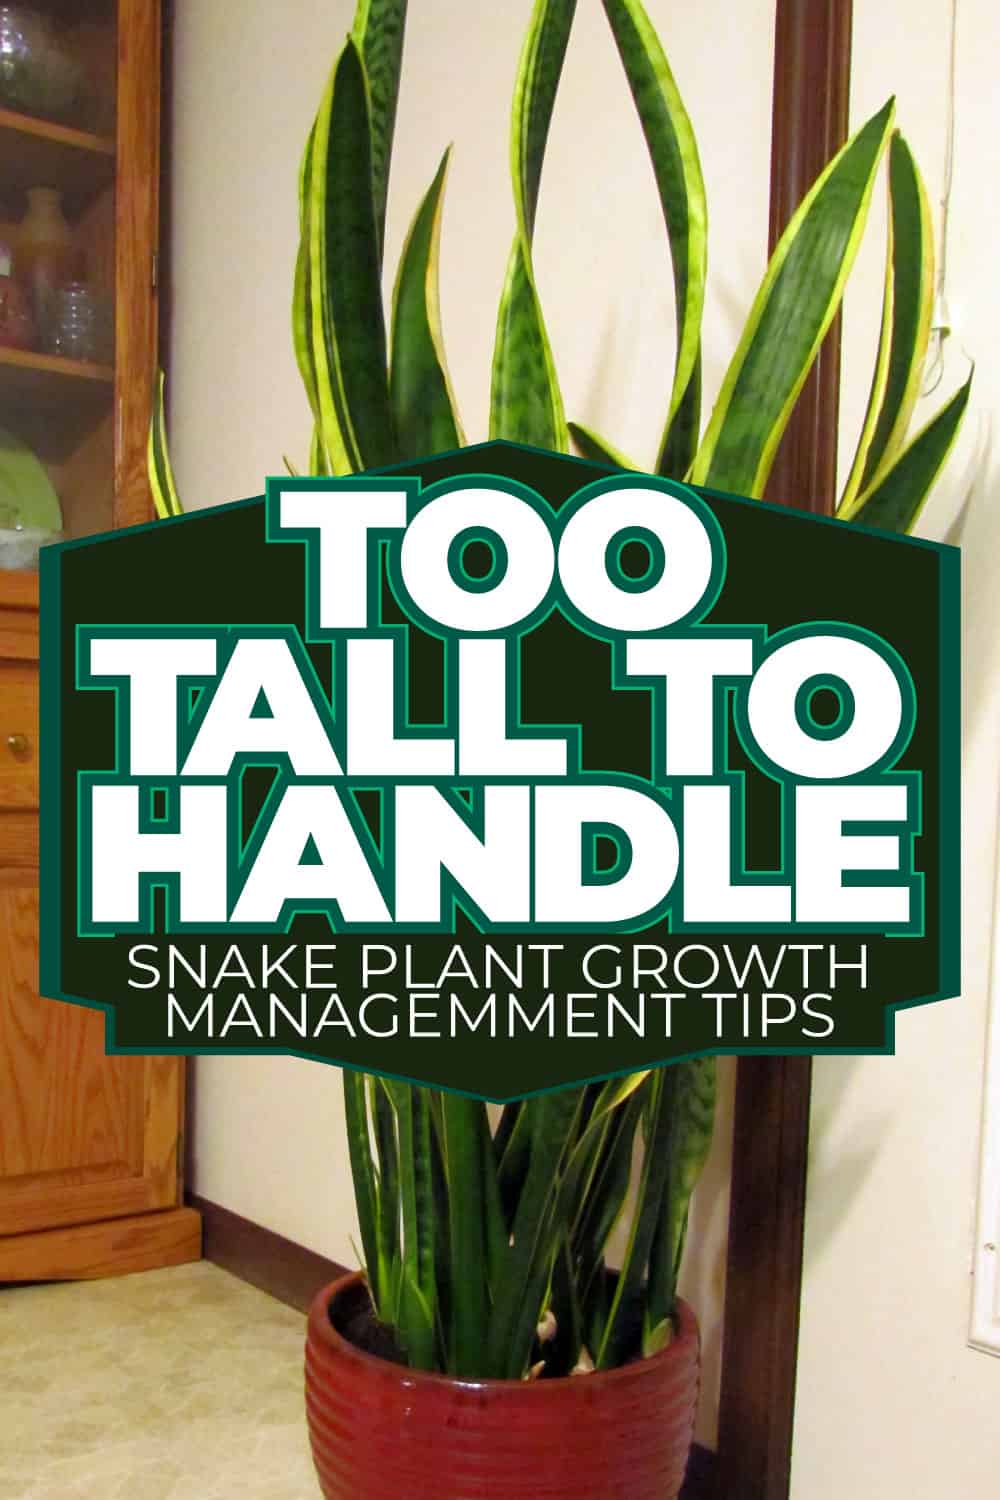 Too Tall to Handle Snake Plant Growth Management Tips